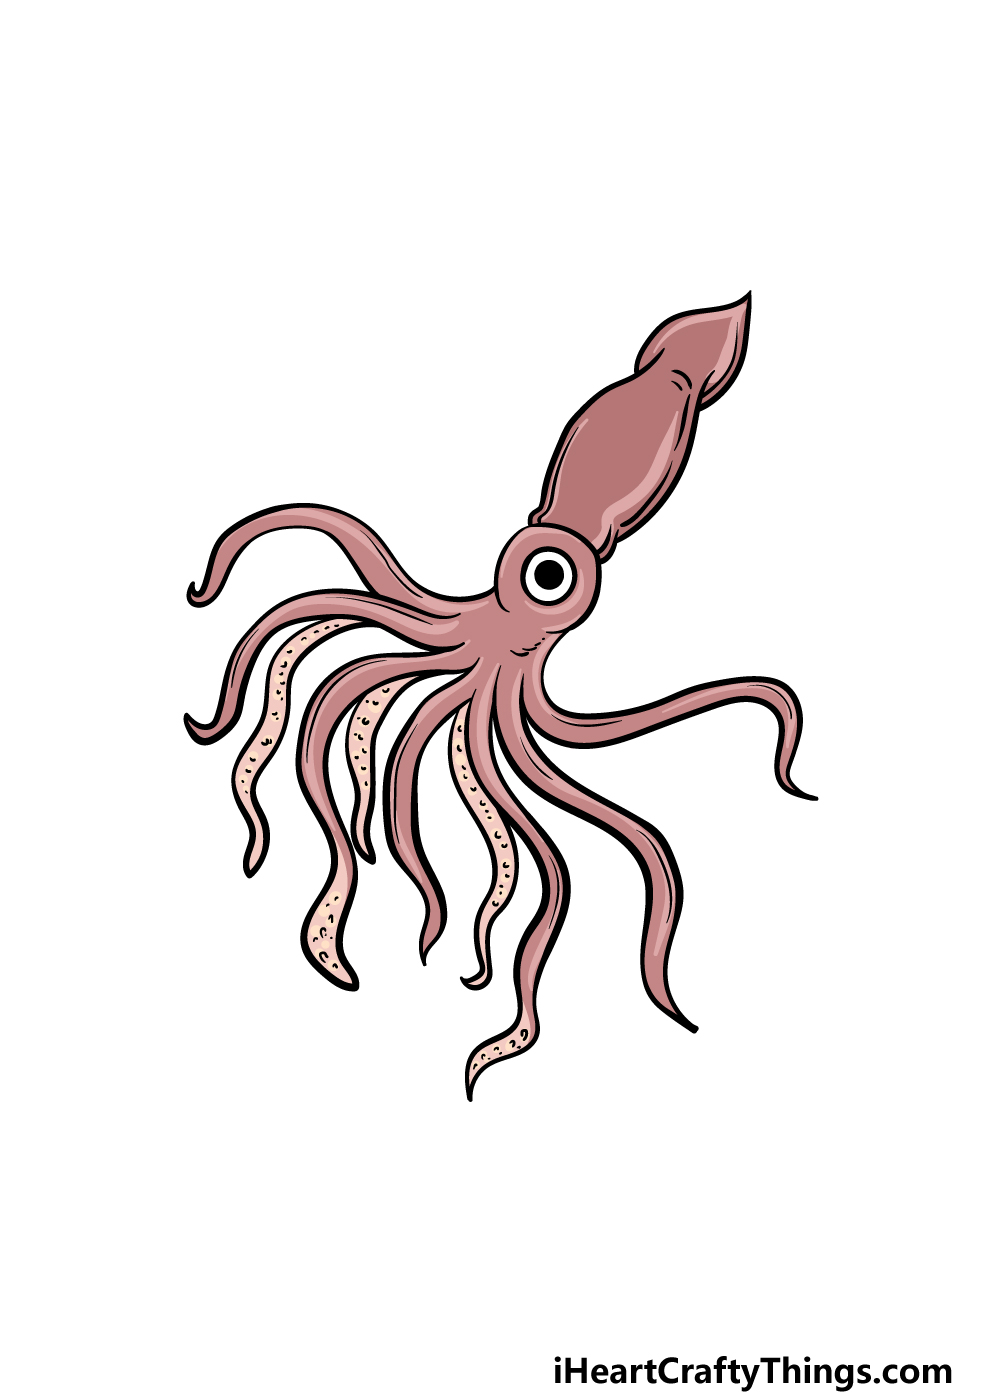 Squid Drawing - How To Draw A Squid Step By Step